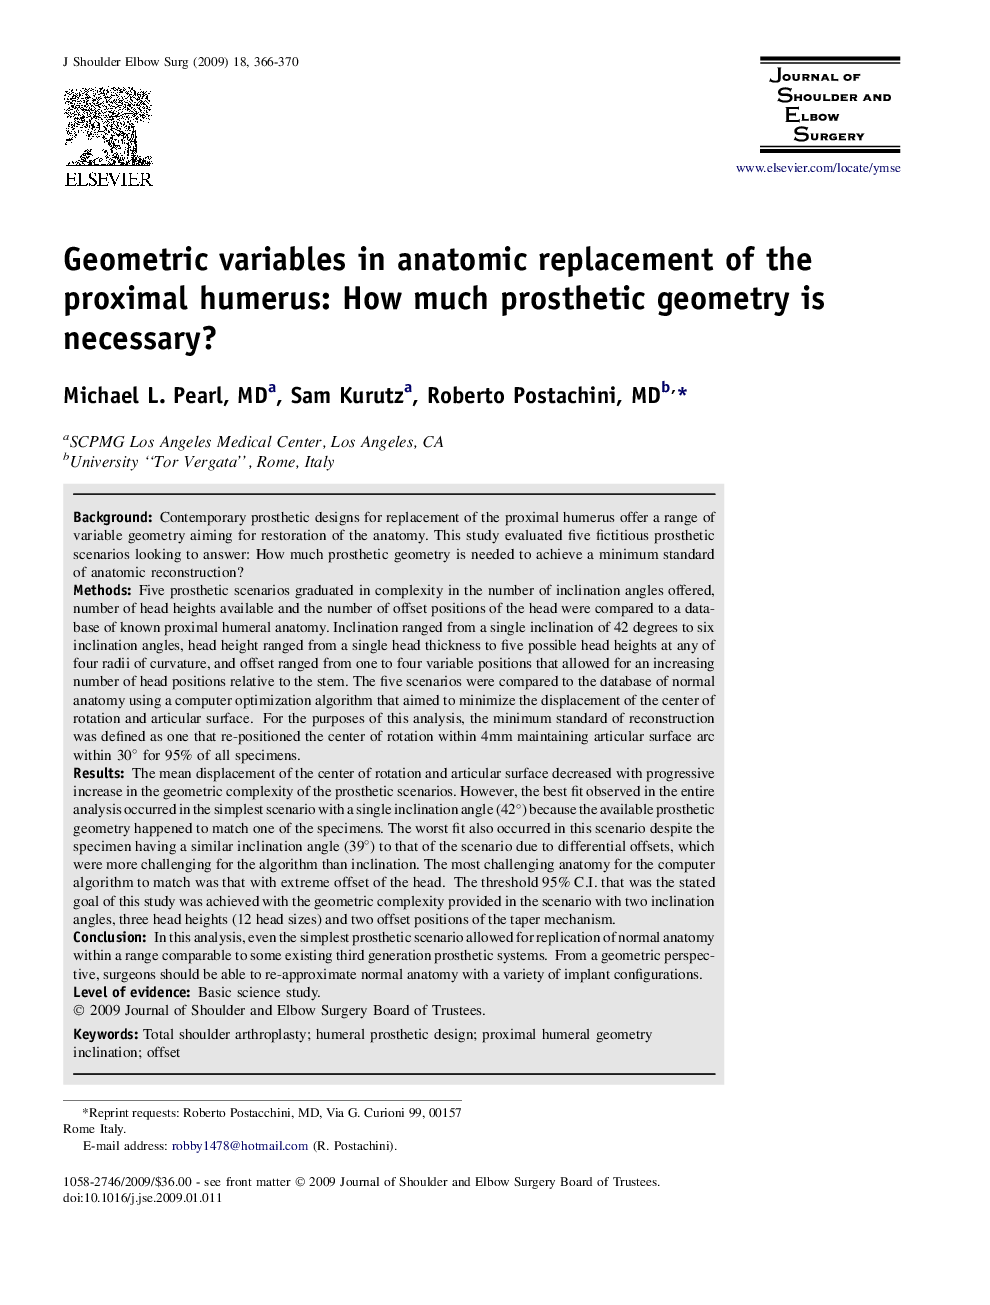 Geometric variables in anatomic replacement of the proximal humerus: How much prosthetic geometry is necessary?